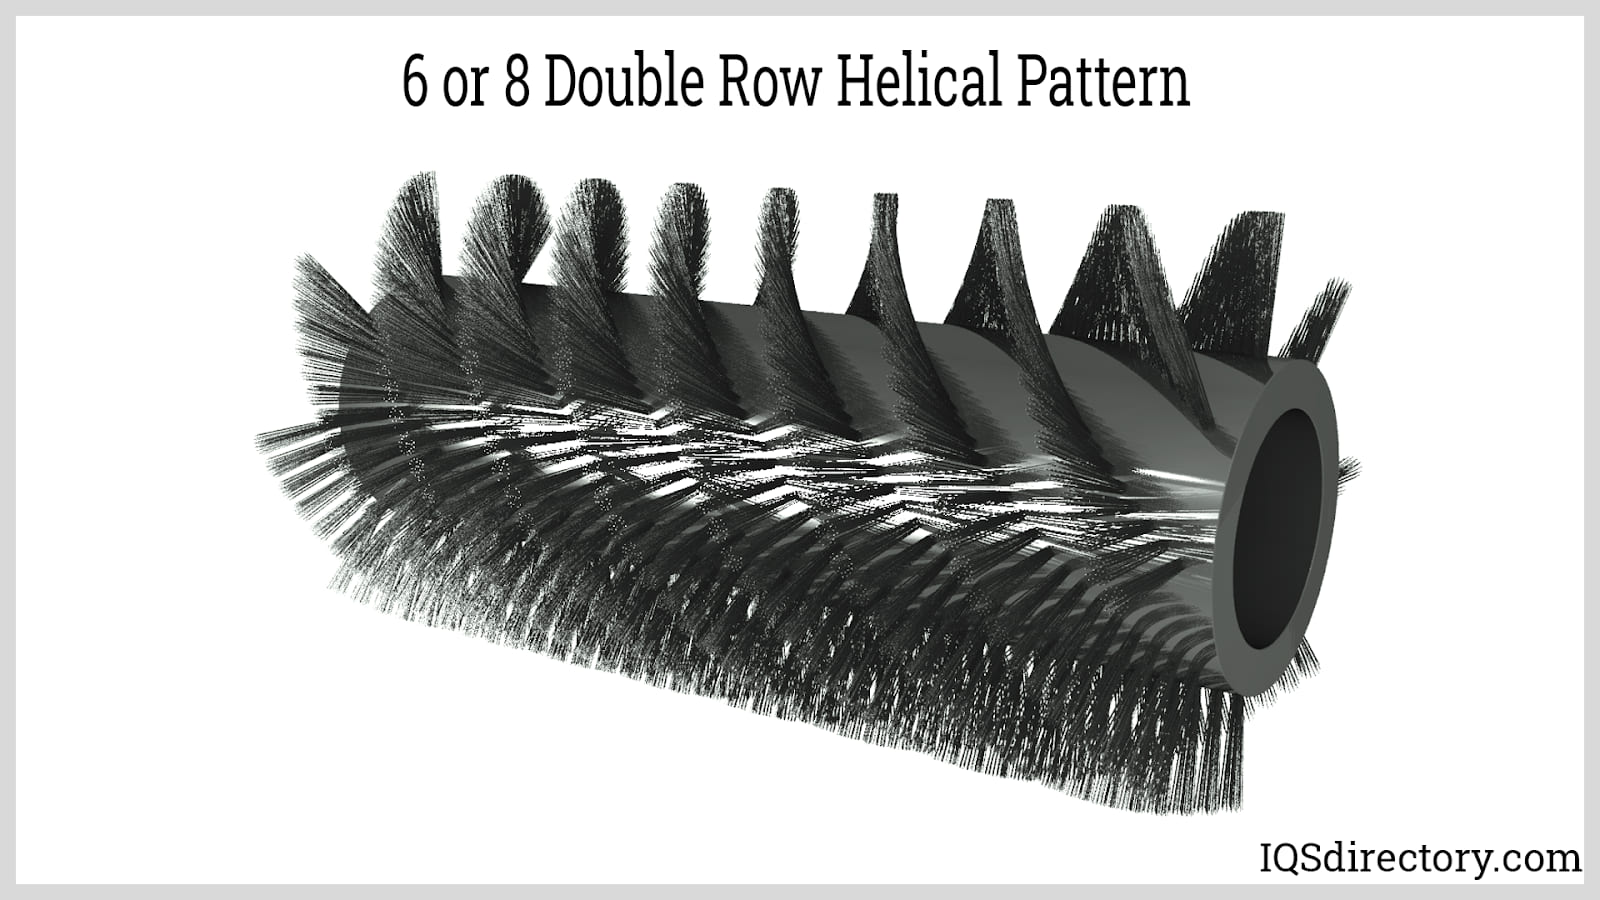 6 or 8 Double Row Helical Pattern